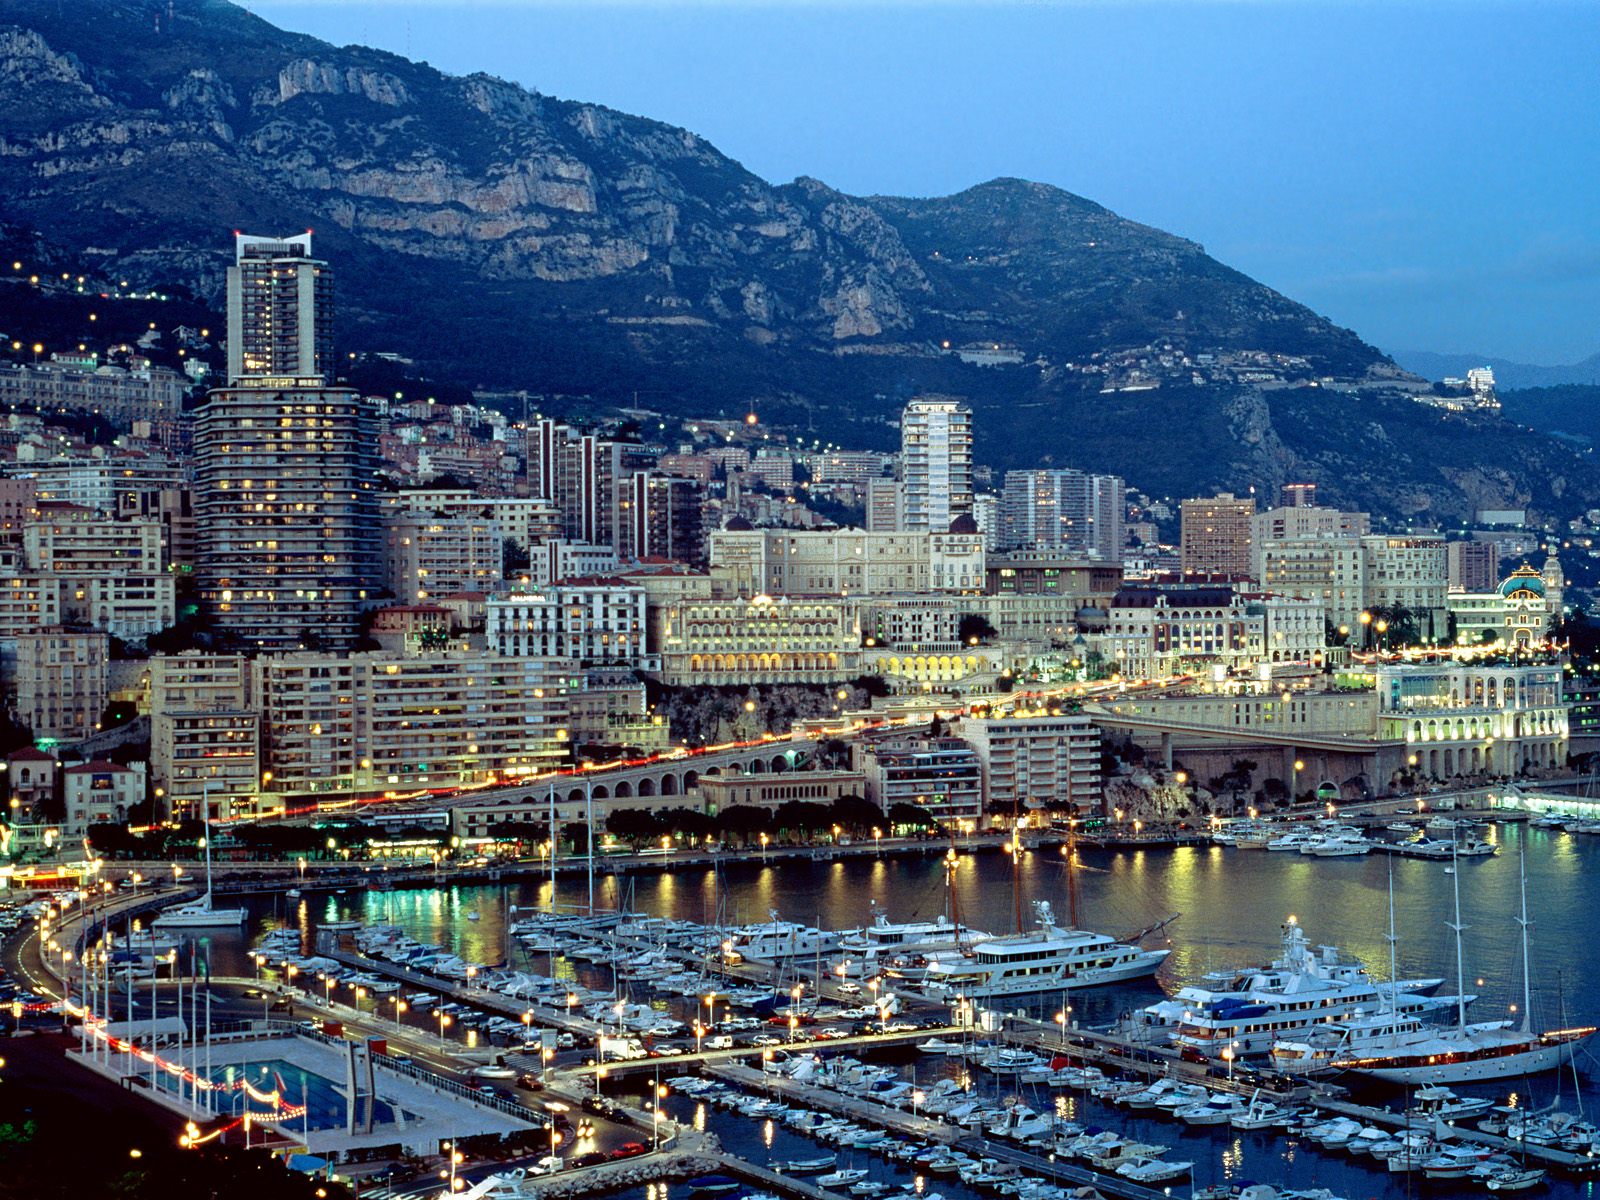 Monaco skyline in the evening with yachts